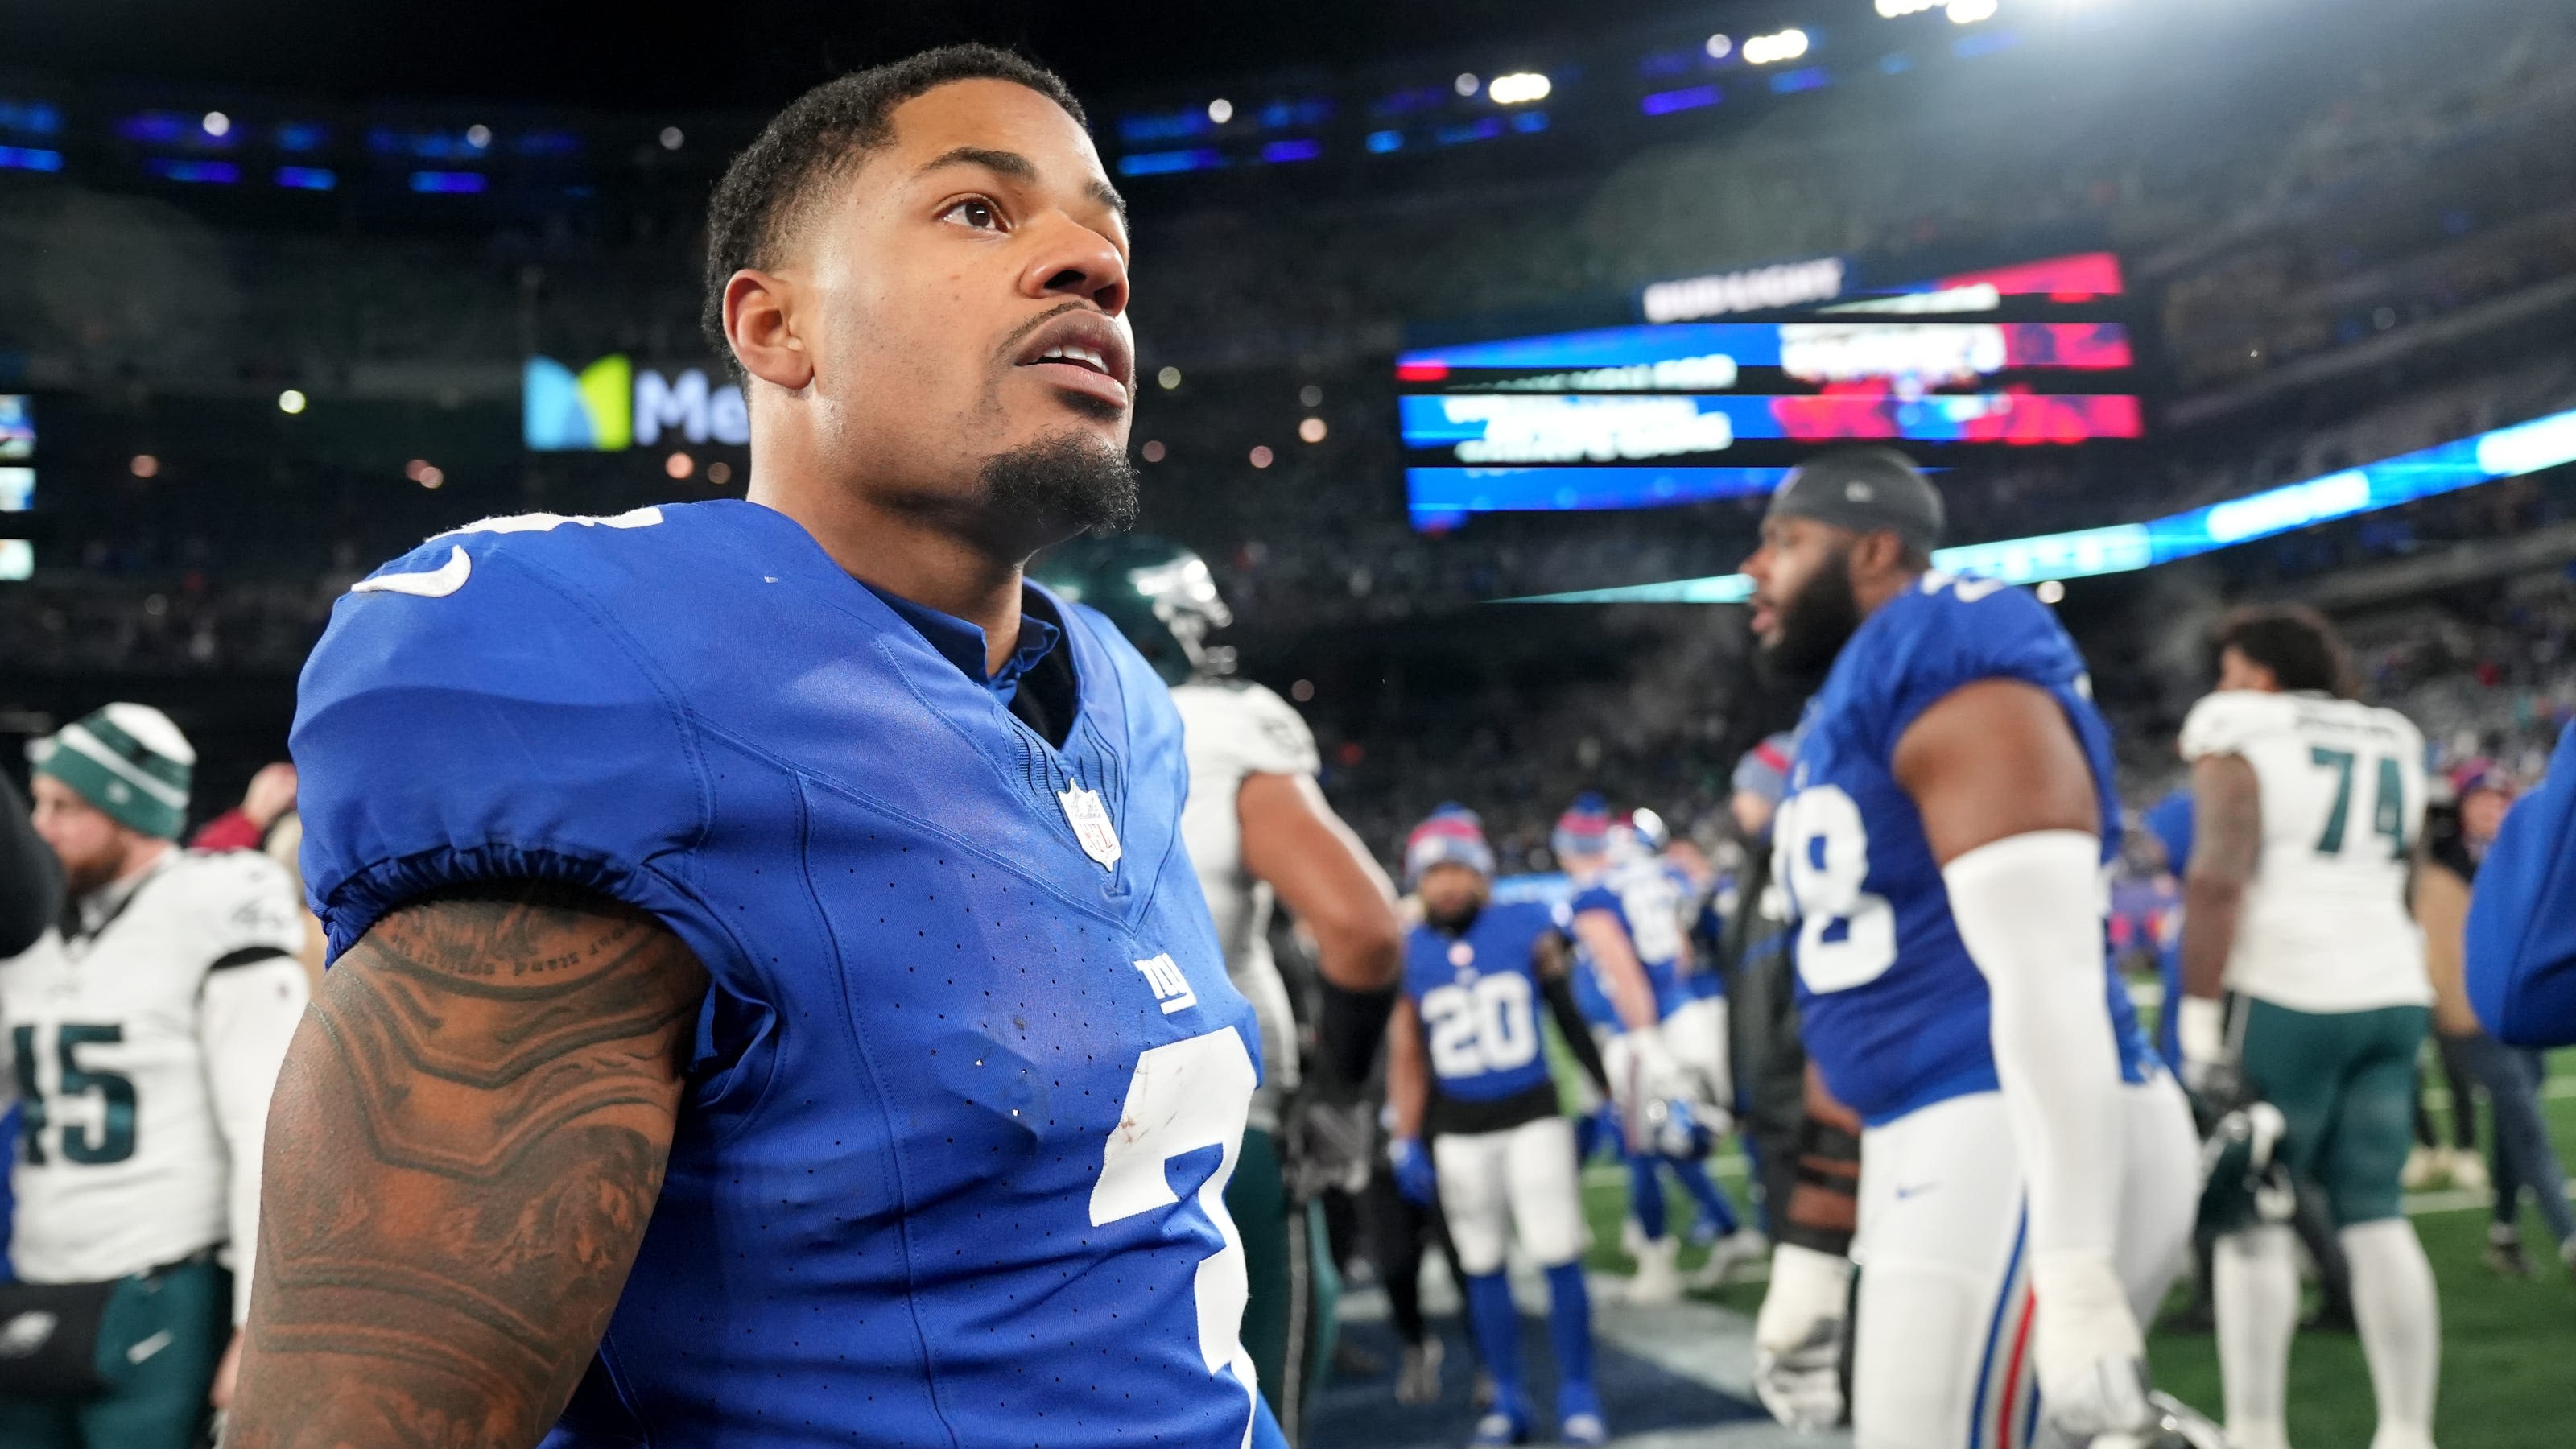 Sterling Shepard to join Buccaneers, reuniting with former teammate after Giants exit